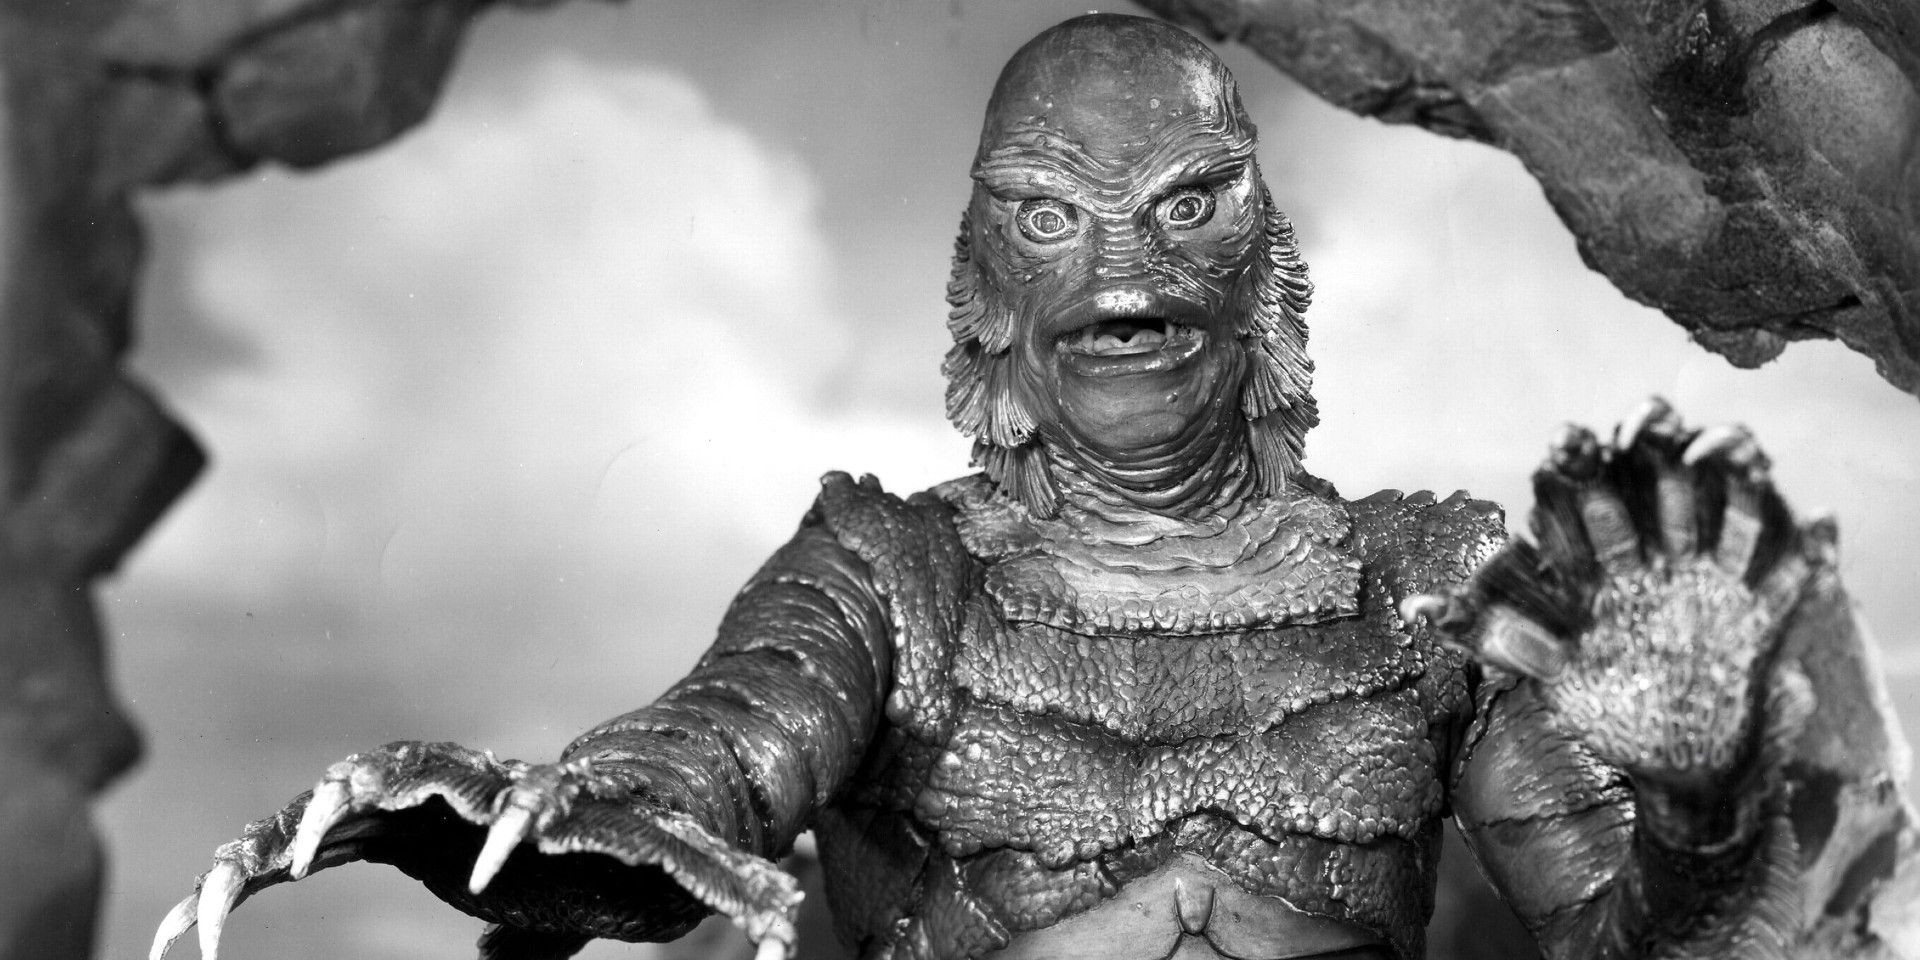 The Gill-man looking straight up in Creature from the Black Lagoon